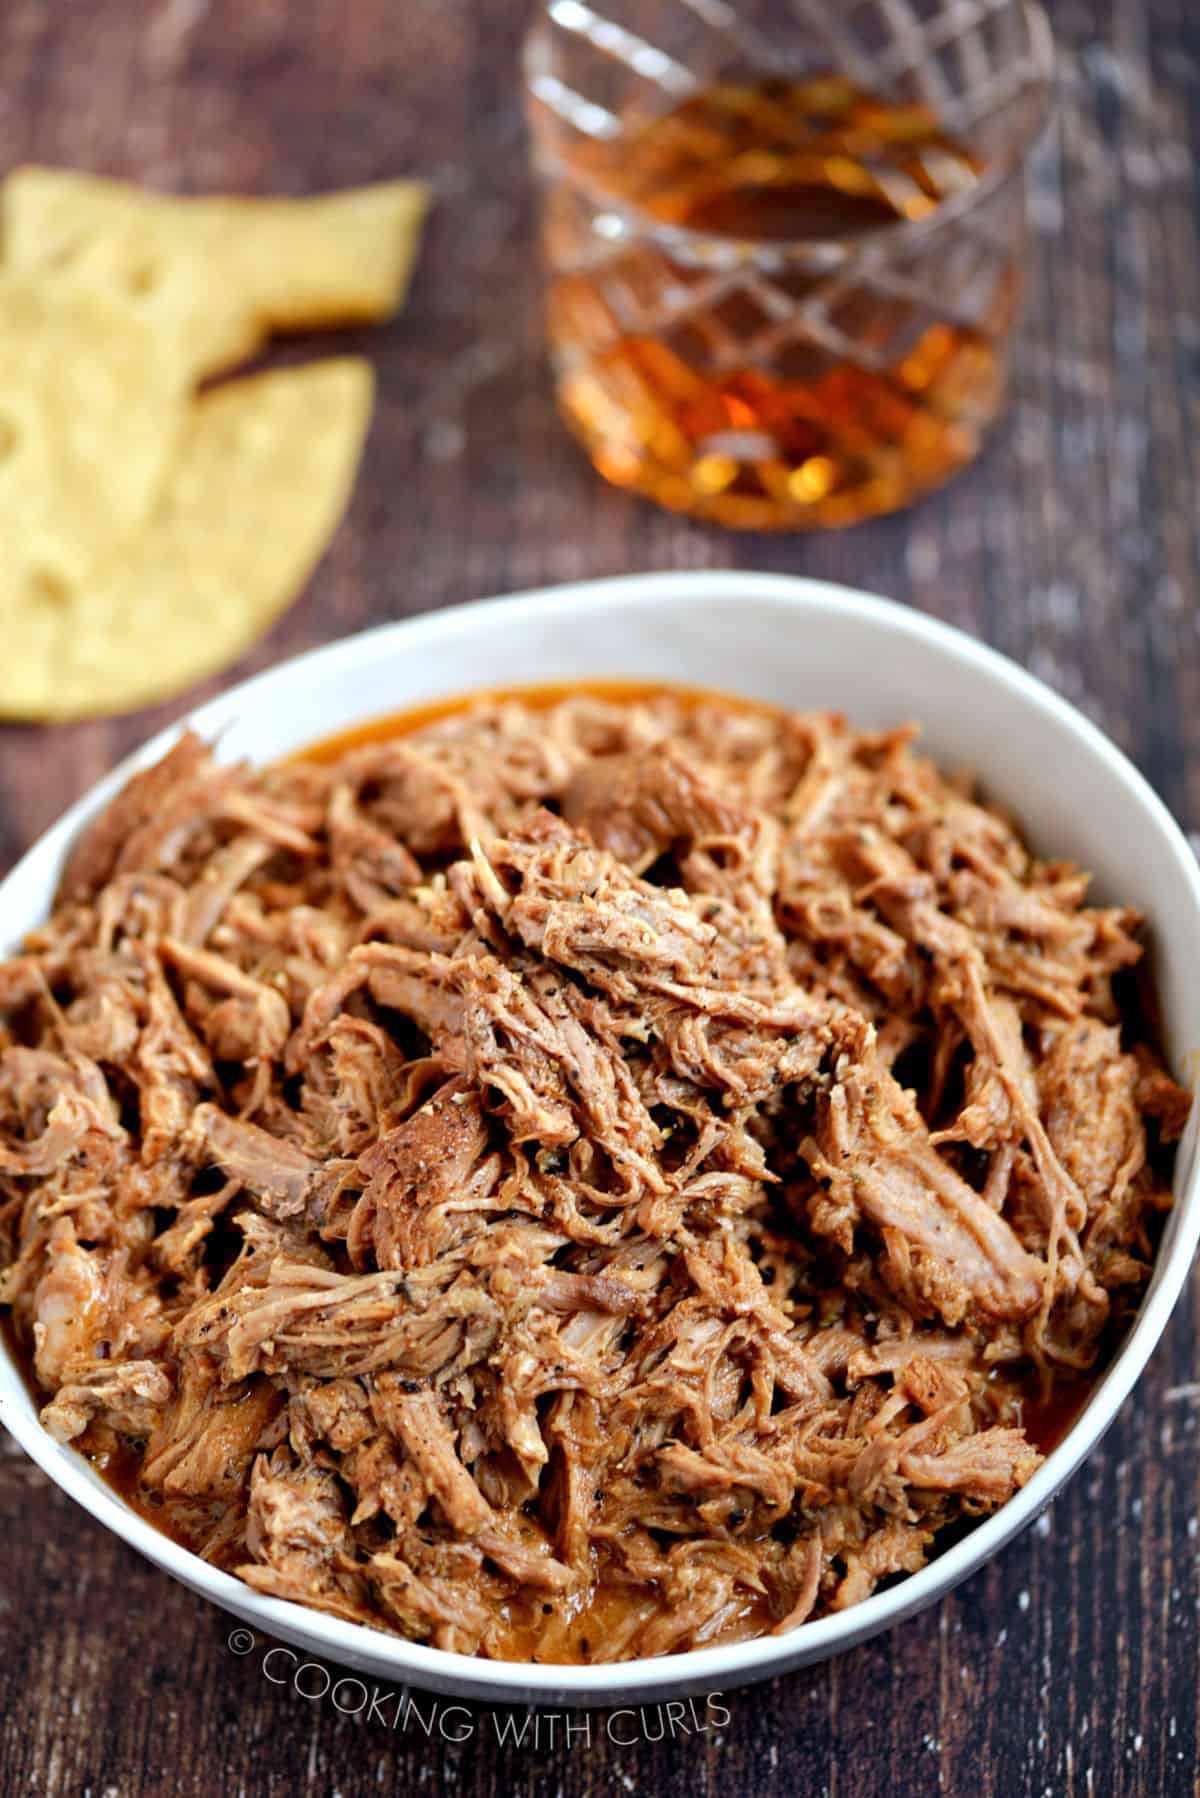 Pulled Pork in a white bowl with tortilla chips and a glass of whiskey in the background.